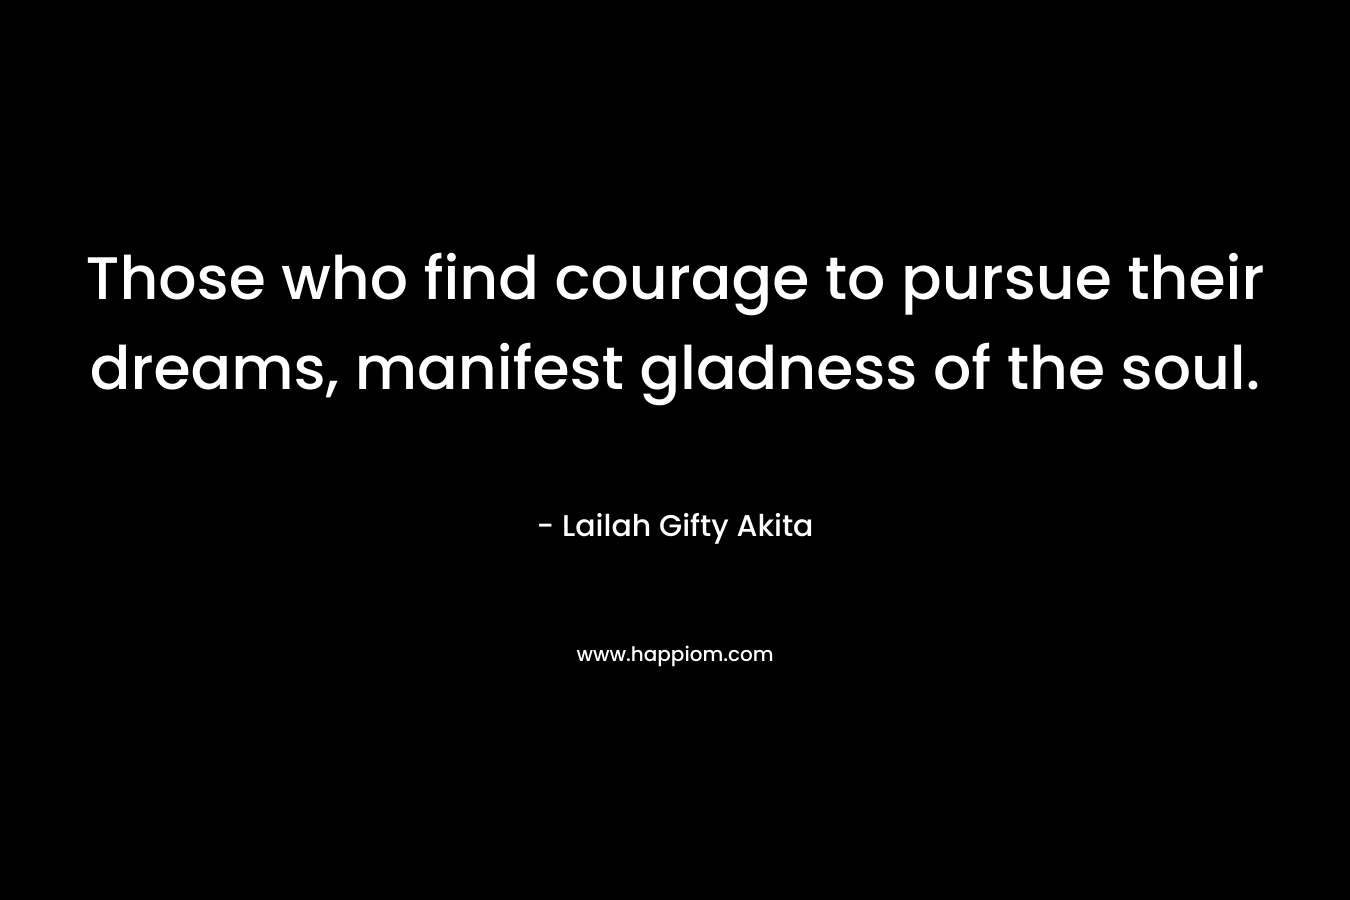 Those who find courage to pursue their dreams, manifest gladness of the soul.